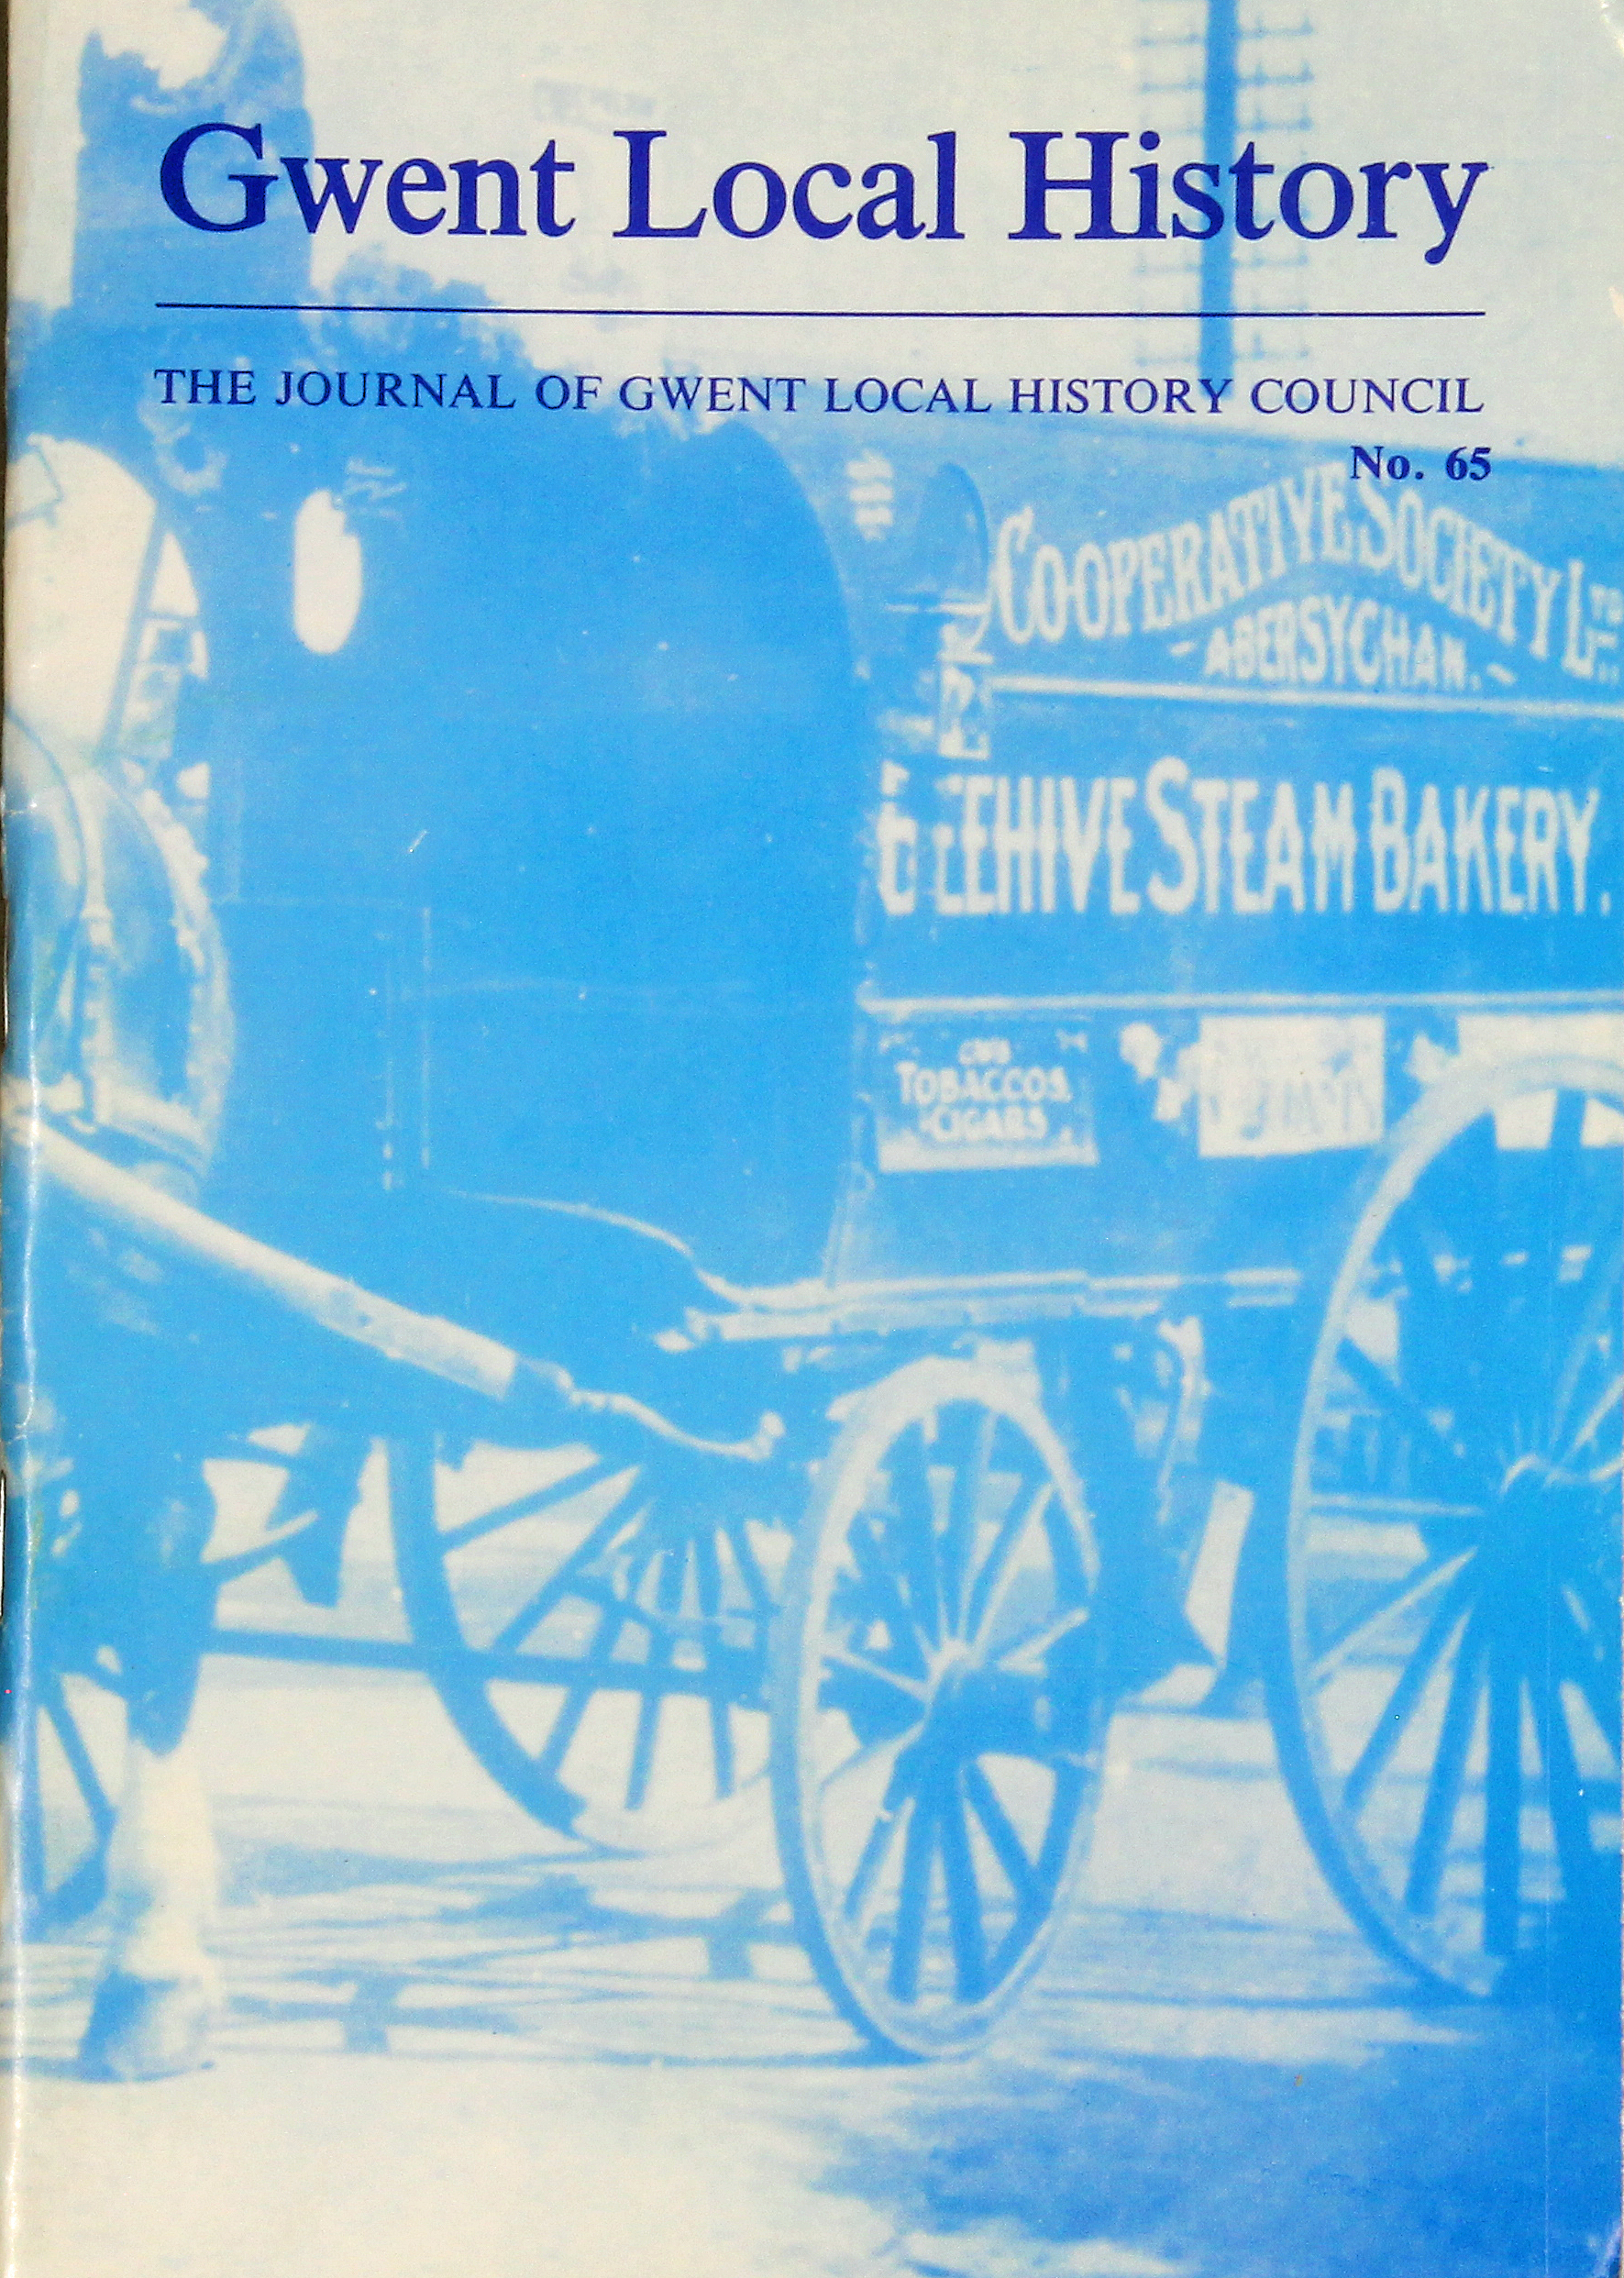 Gwent Local History: Journal of the Gwent Local History Council No.65, Autumn 1988, £2.00